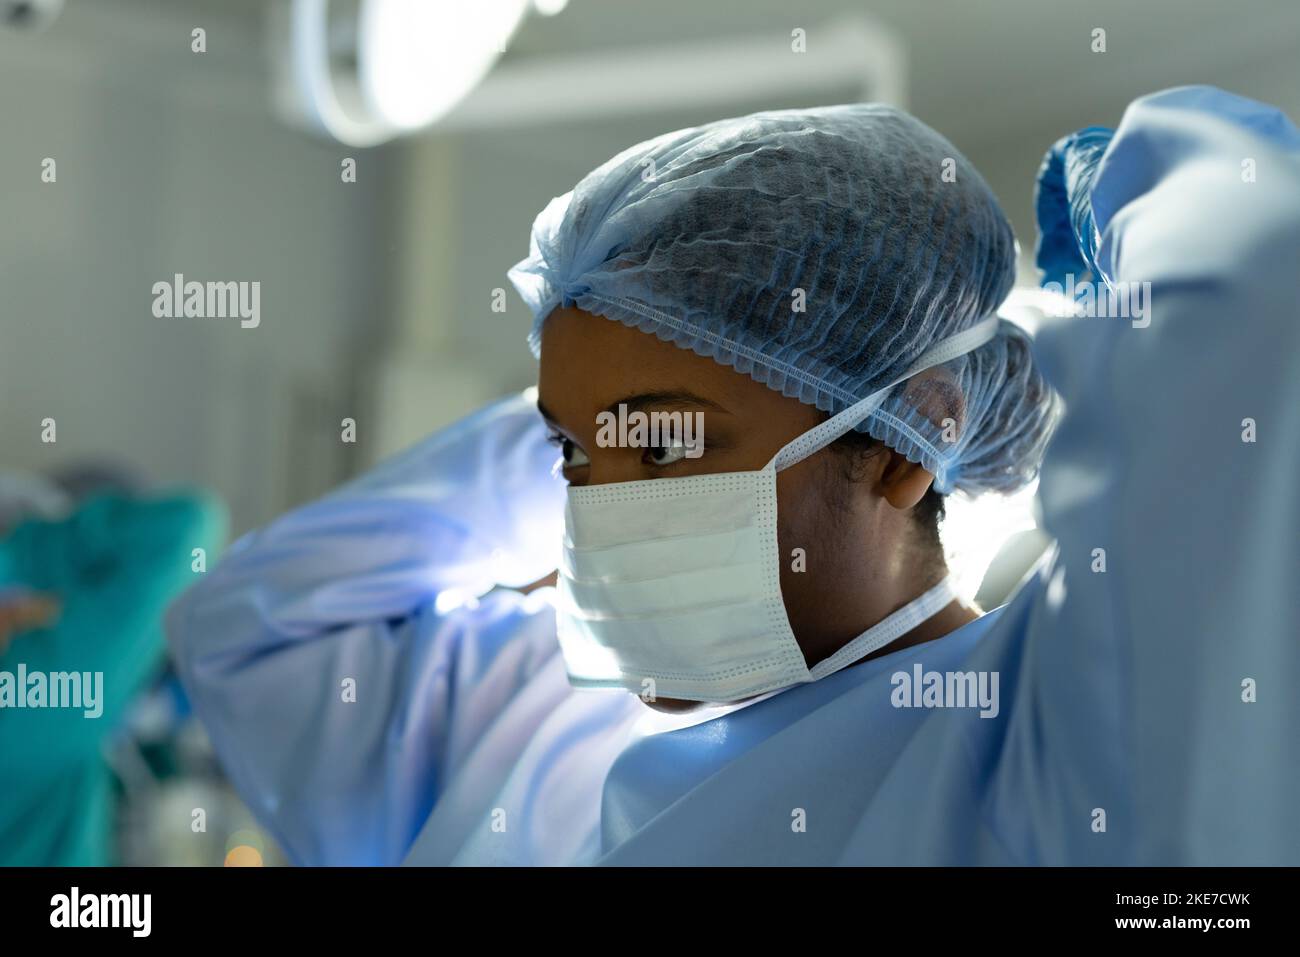 Biracial female surgeon in surgical cap and gown putting on mask in operating theatre Stock Photo